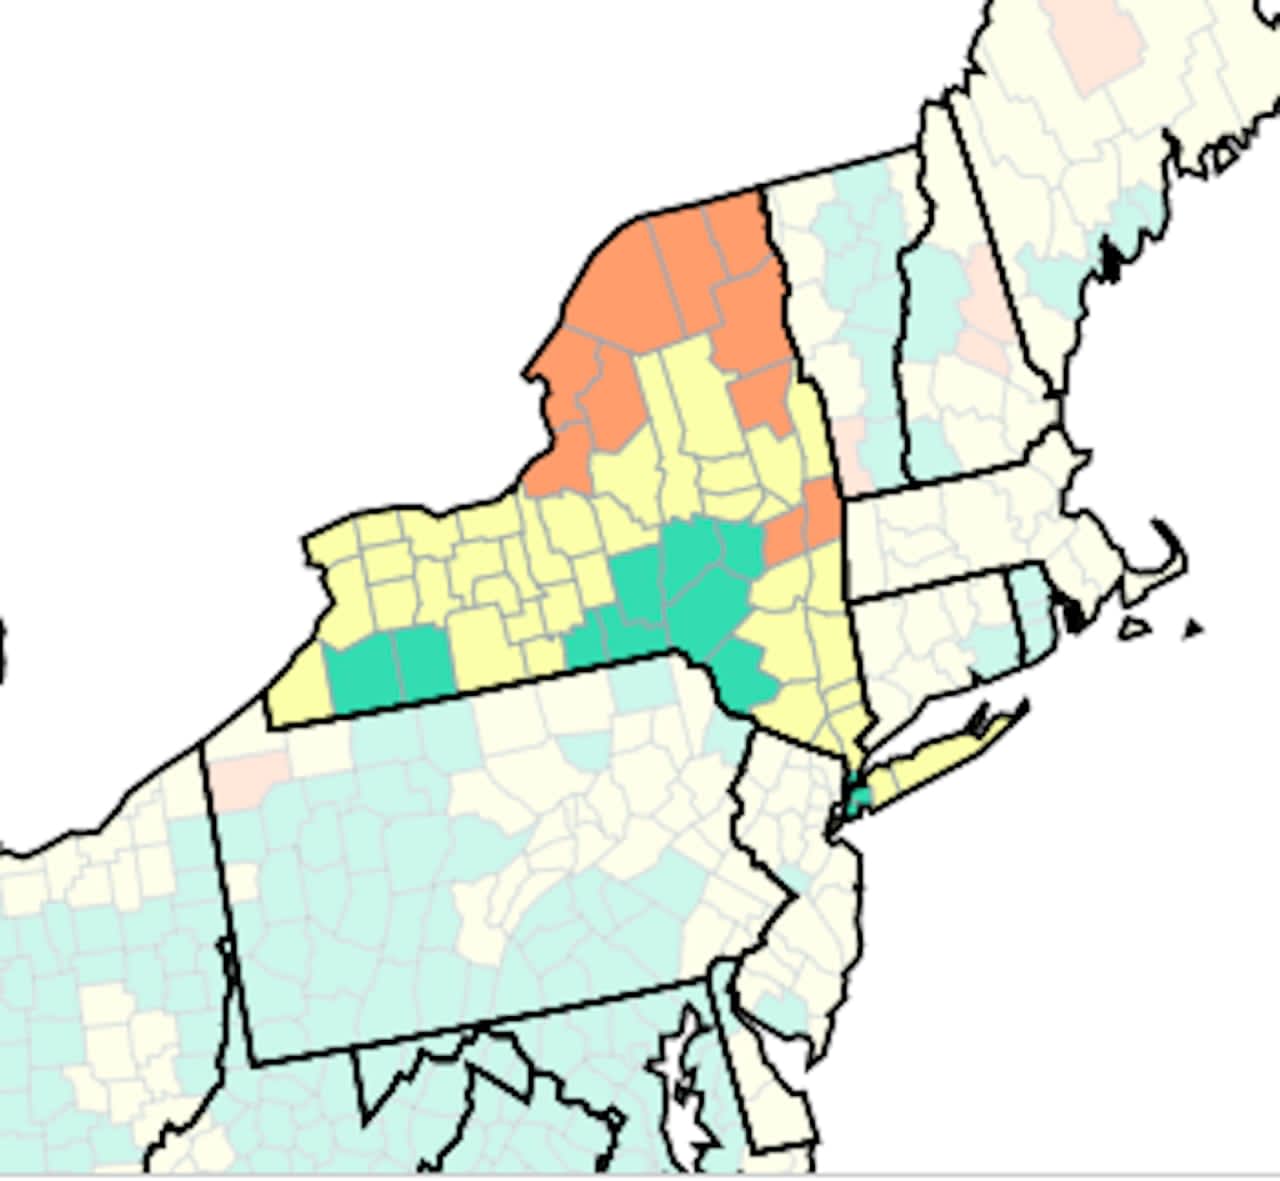 Counties shown in orange are where the CDC advises wearing masks indoors. Yellow counties are places in which those at high risk for severe disease should be cautious, and in green counties, indoor masking is not necessary.